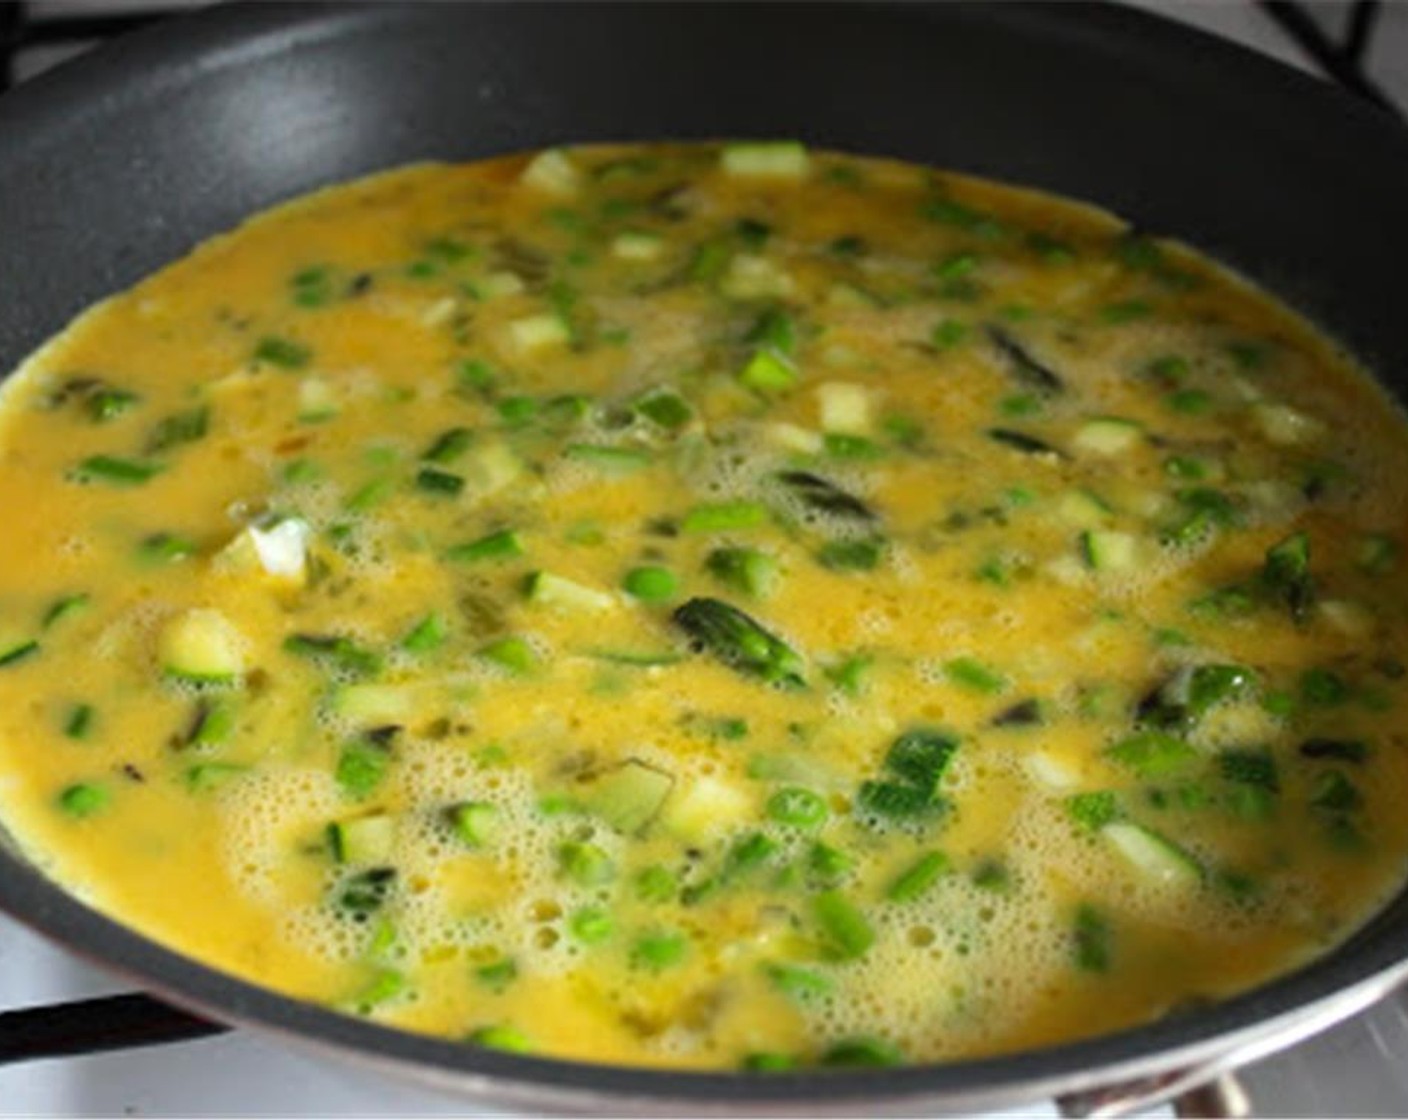 step 7 Add the eggs to the pan and immediately lower the heat to low. While your frittata is cooking, preheat the broiler.